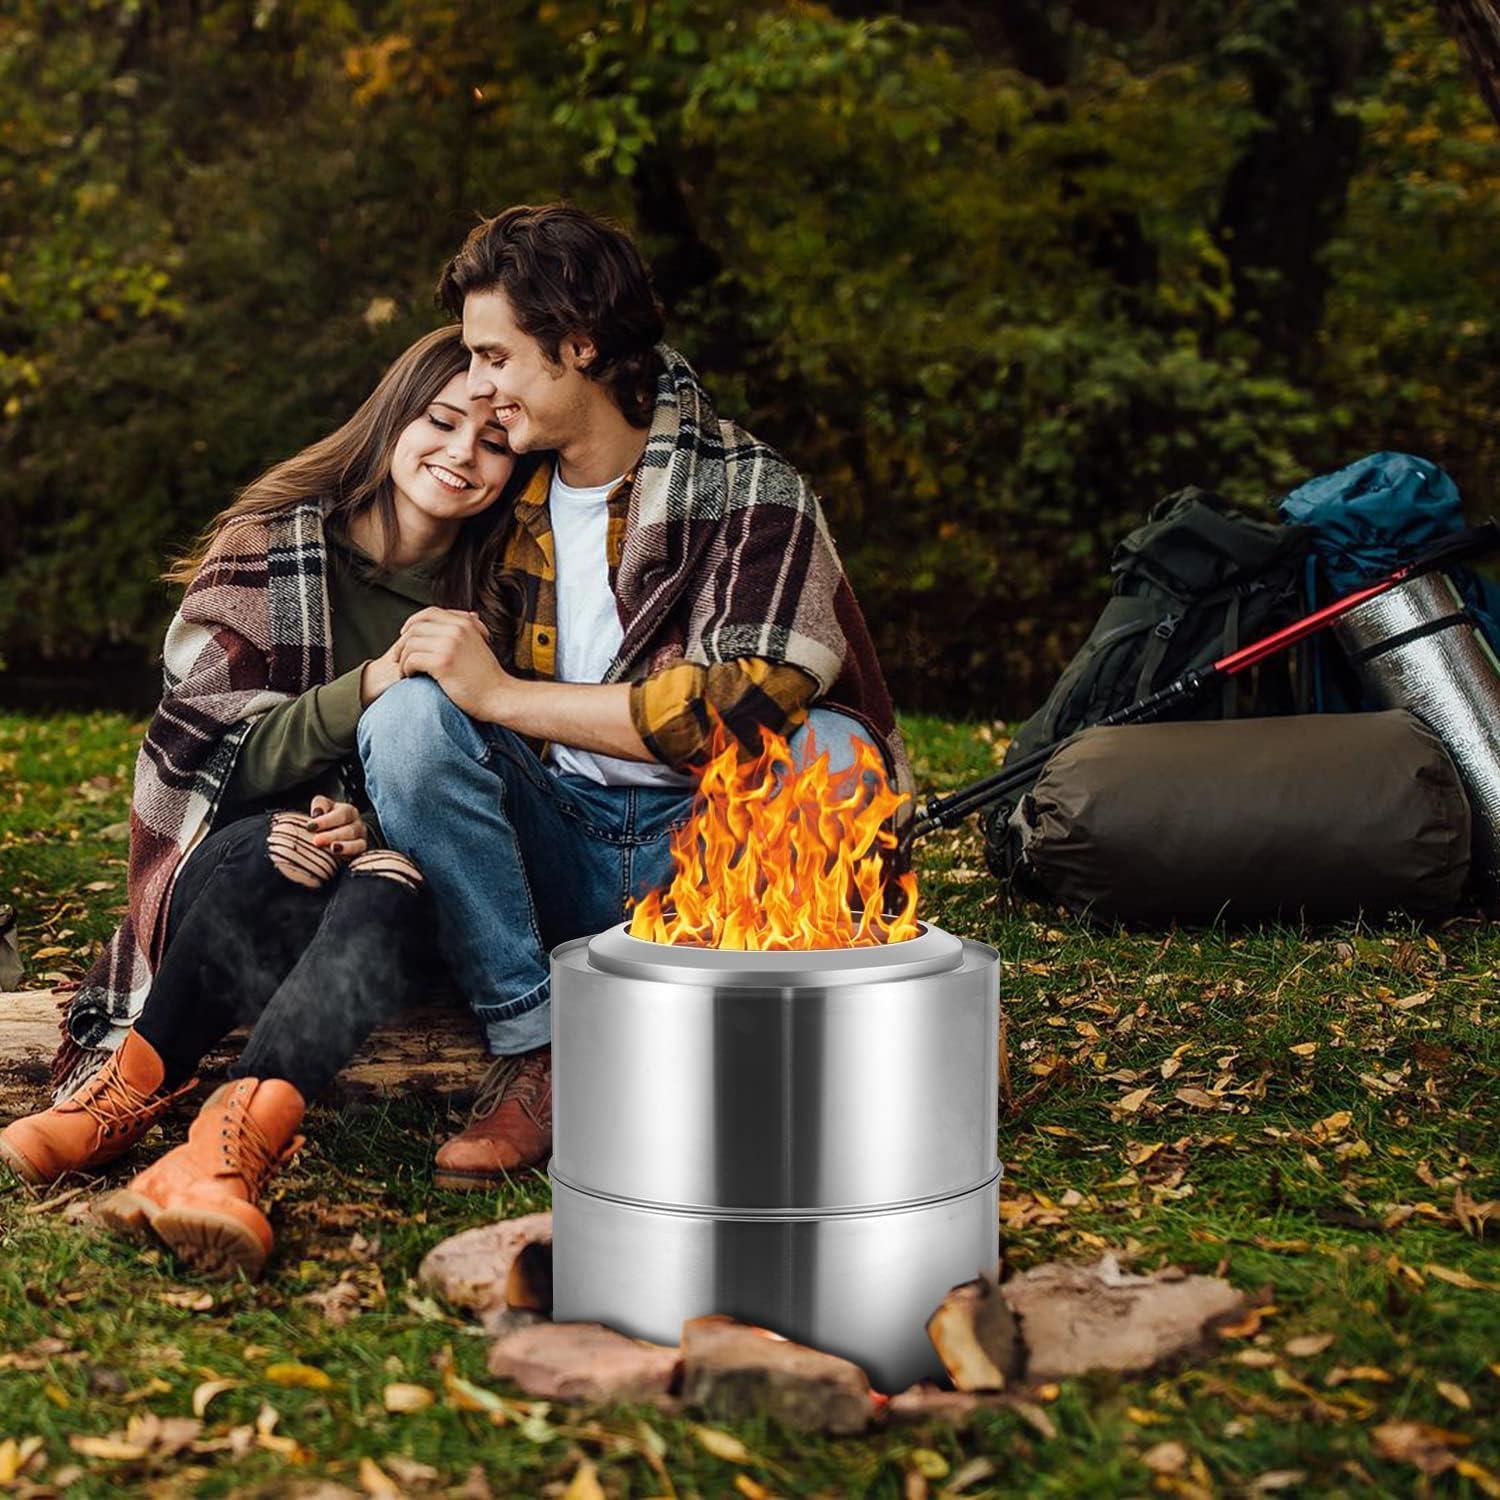 Stainless Steel smokeless Fire Pit, Outdoor Grill Wood Burning Portable Firepit Stainless Steel Picnic Camping Bonfire(15 Inch) - Lazy Pro